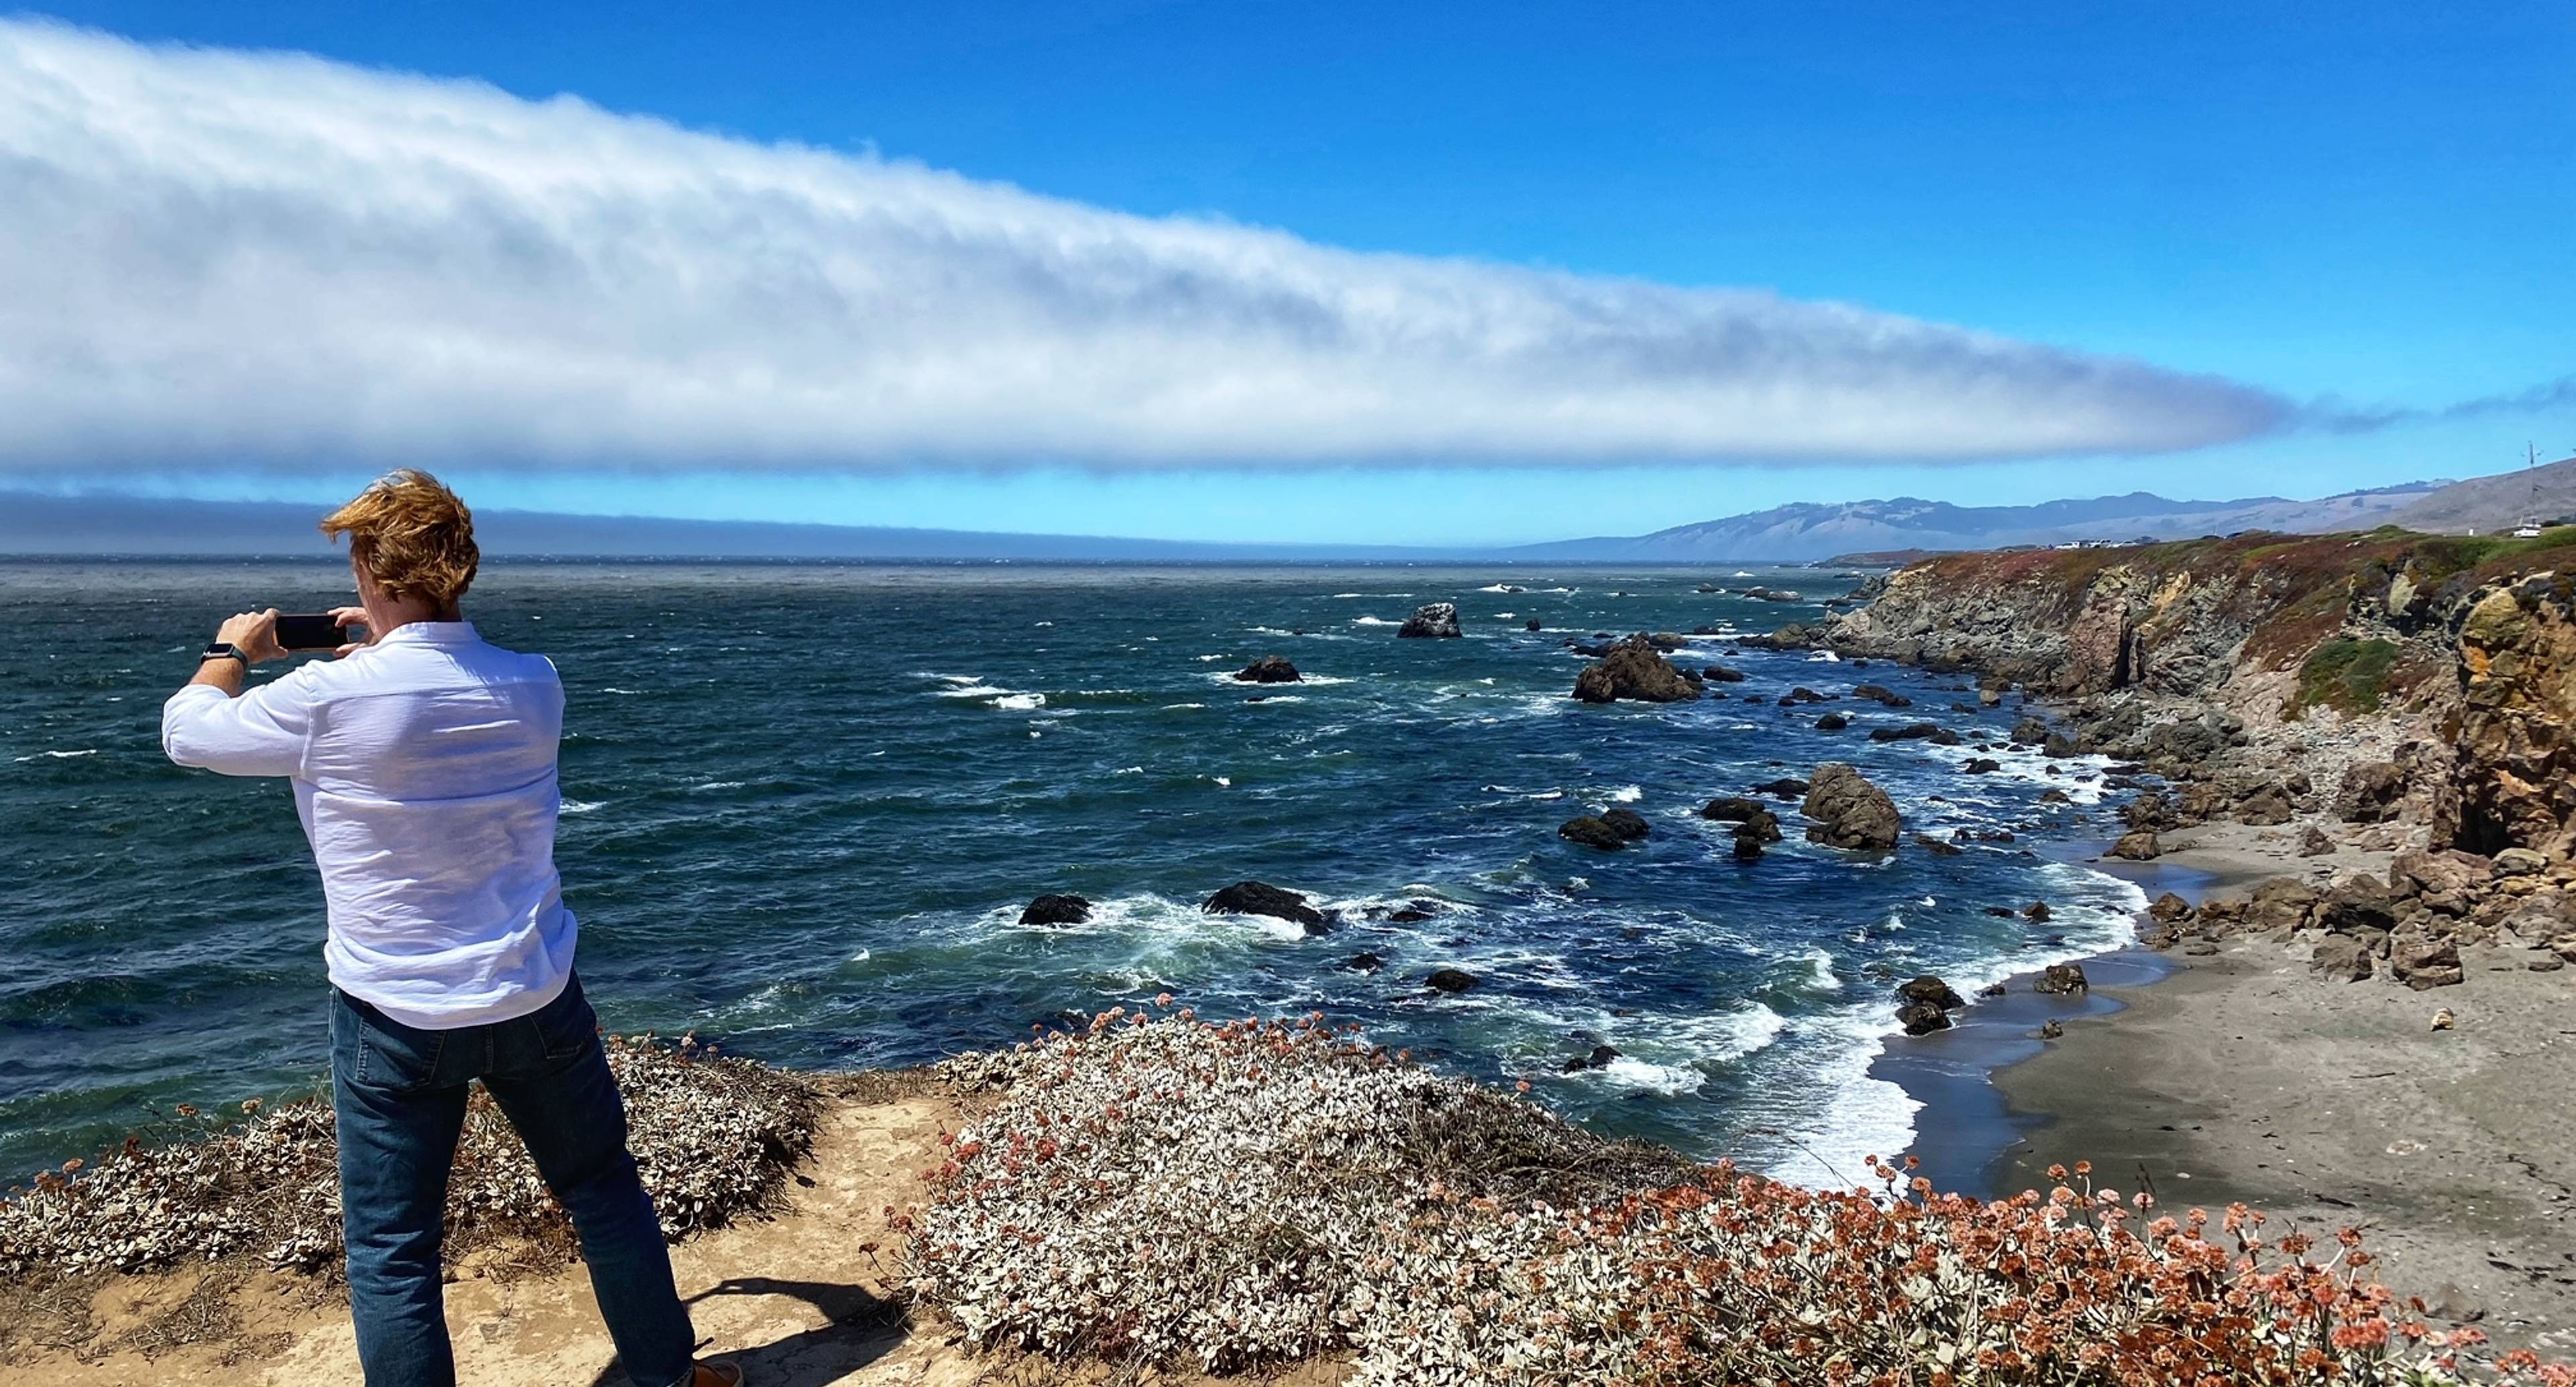 Sweeping Coastal Vistas, California History, and the Avenue of the Giants